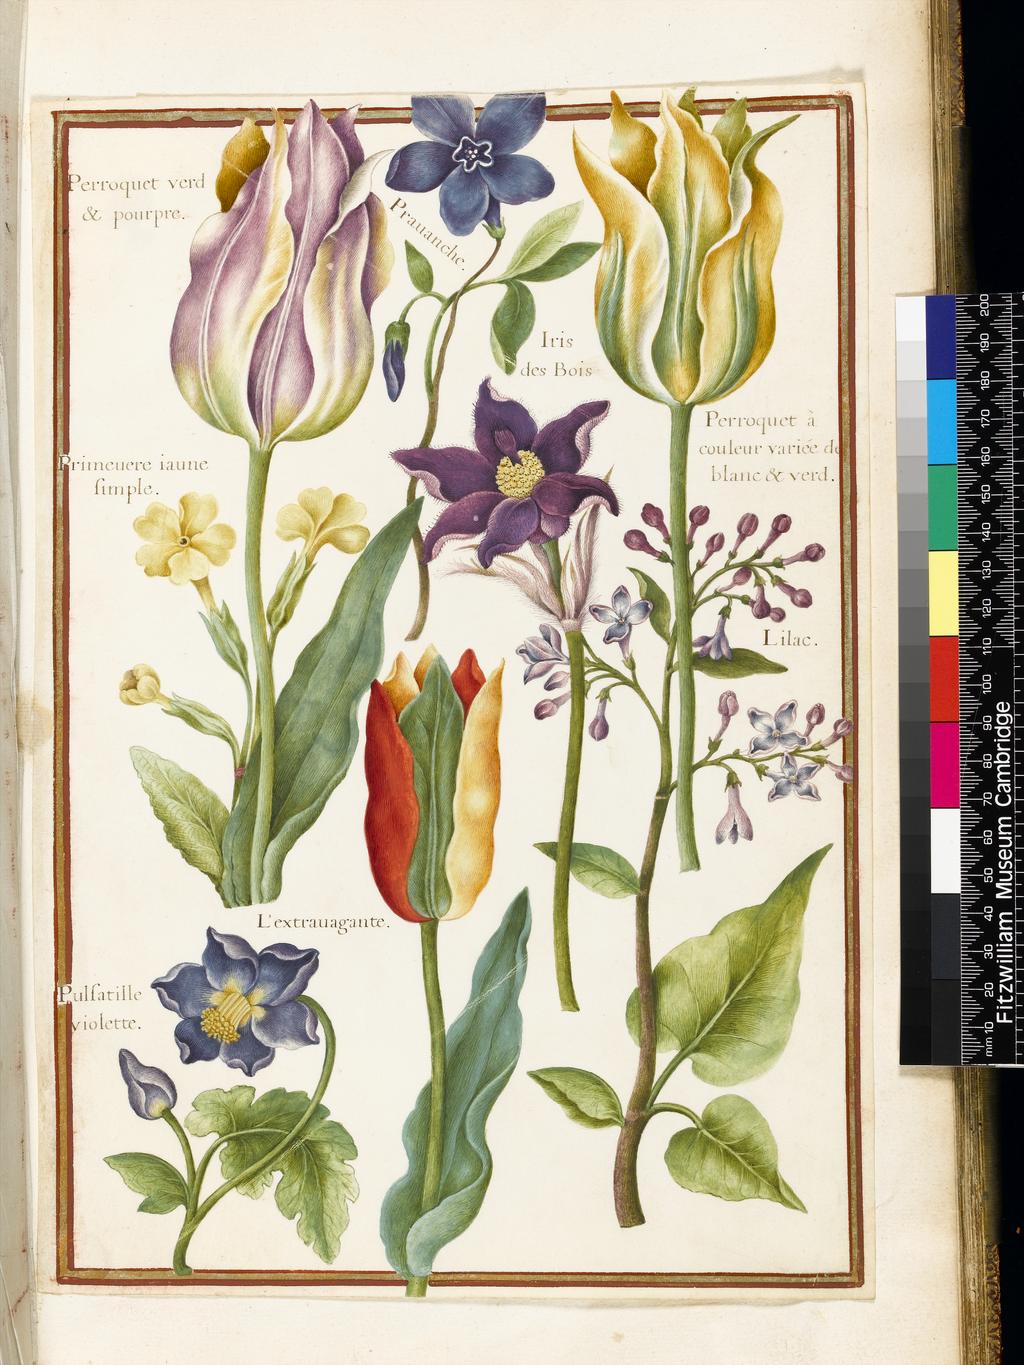 An image of Stylized drawings of various flowers (assigned title). Robert, Nicolas attributed to (French, 1614-1685). Graphite, watercolour and bodycolour on vellum, height 321 mm, width 222 mm. Album containing 62 botanical drawings on vellum tipped in on the gilt-edged pages of the album which bear the watermark of an 18th century French paper-maker, Malmenayde of Thiers (active from 1731). Bound in red morocco with clasps, the spine tooled in gilt. The Pages are interleaved with thin protective paper. Ruled lines of red and gold border the drawings on all sides. 17th Century. French.